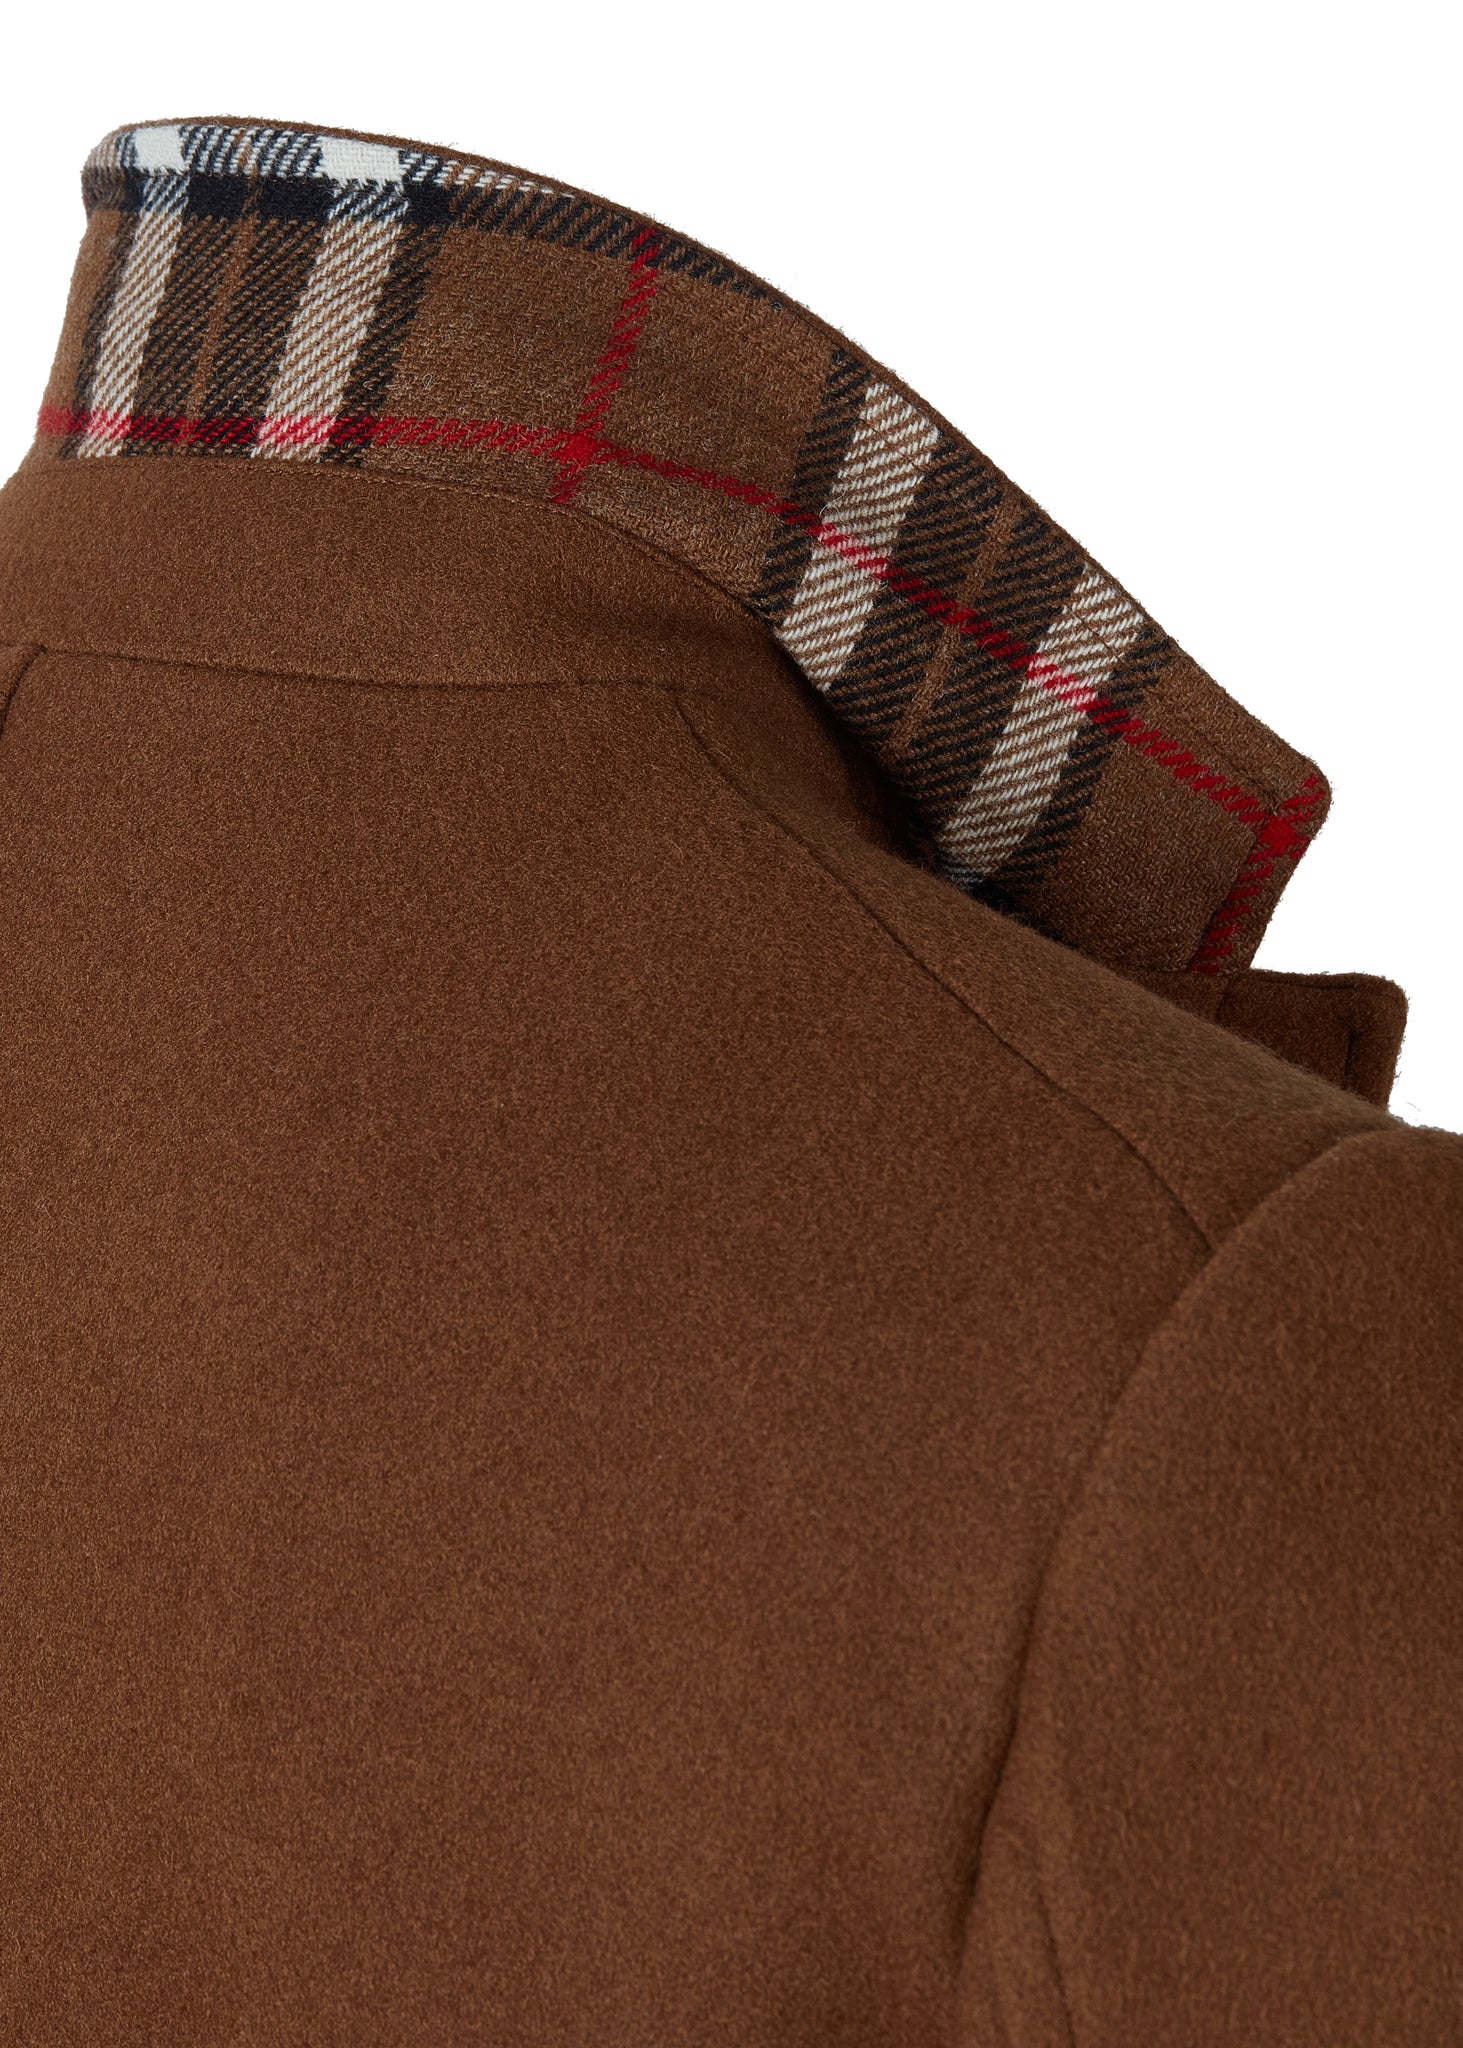 Dark camel mens coat with collar popped to show tan and red tartan under collar